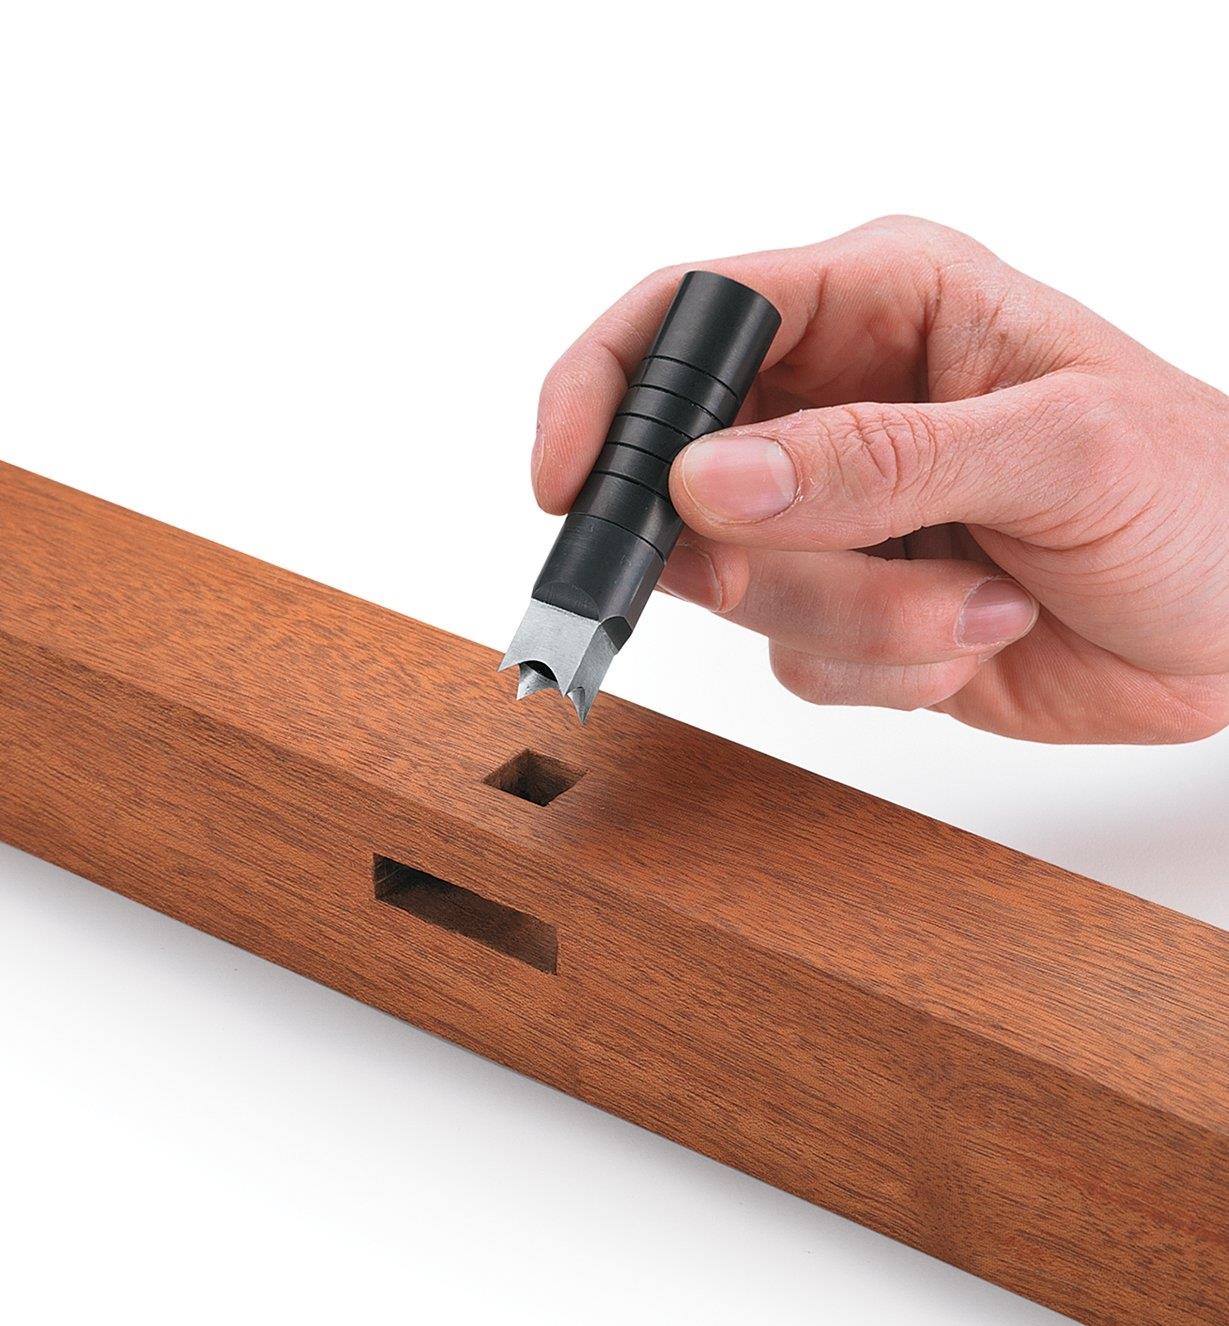 Using a square hole punch to make a square hole in wood